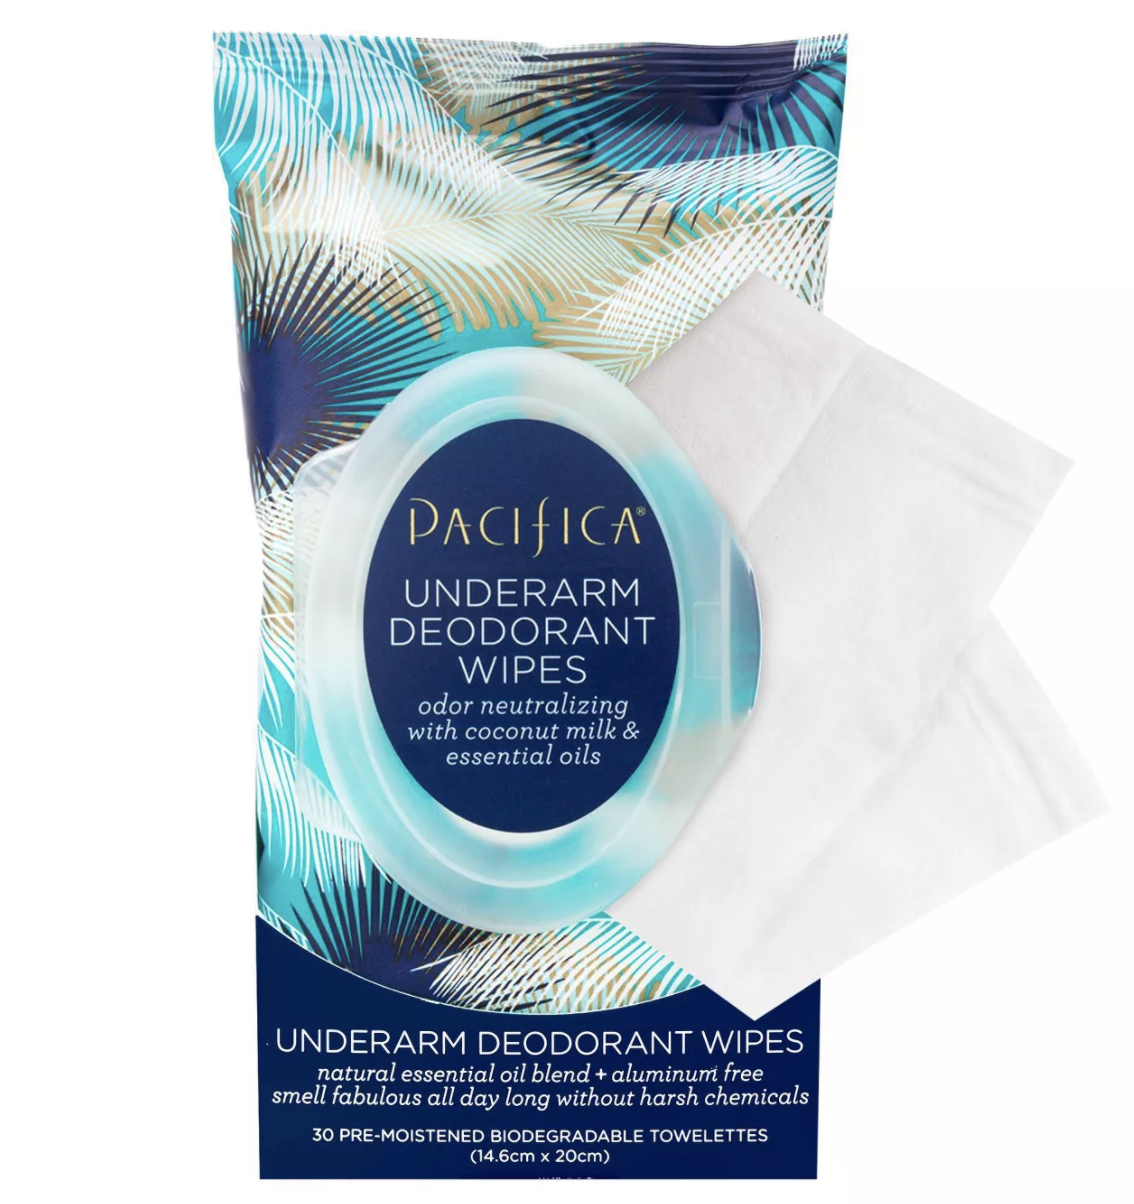 the package of underarm deoderant wipes